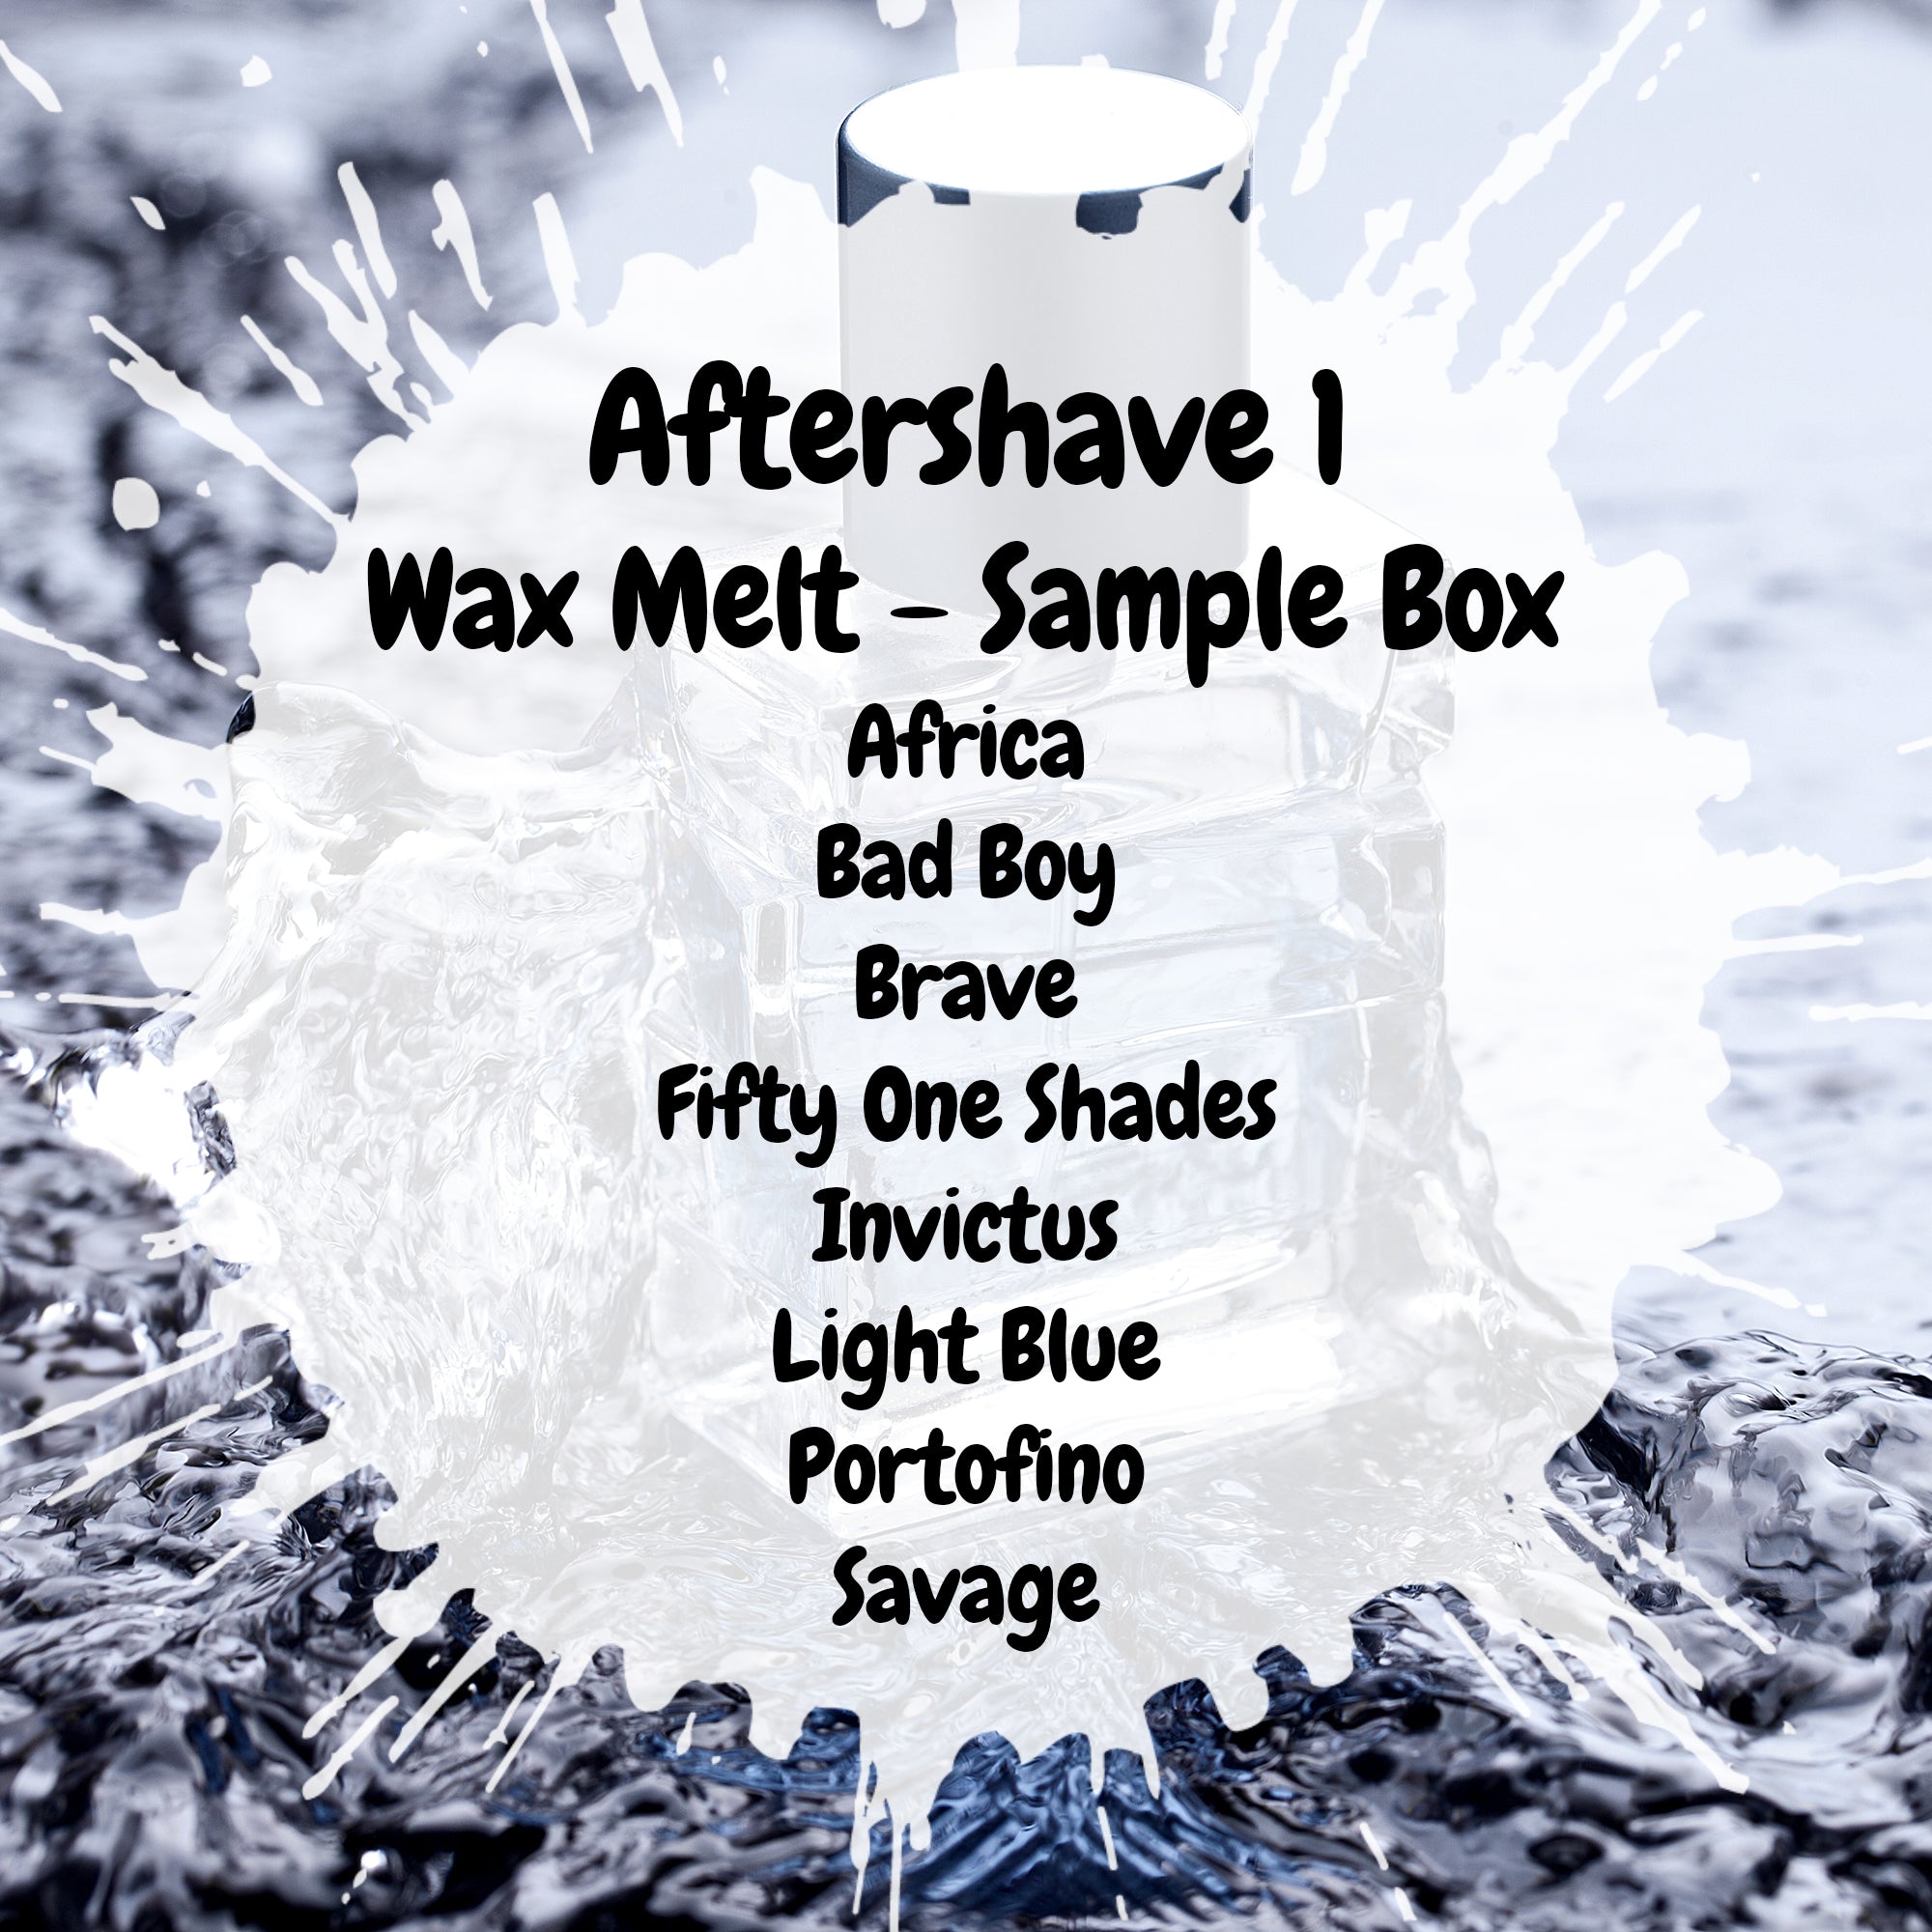 Aftershave 1 Wax Melt Sample Box